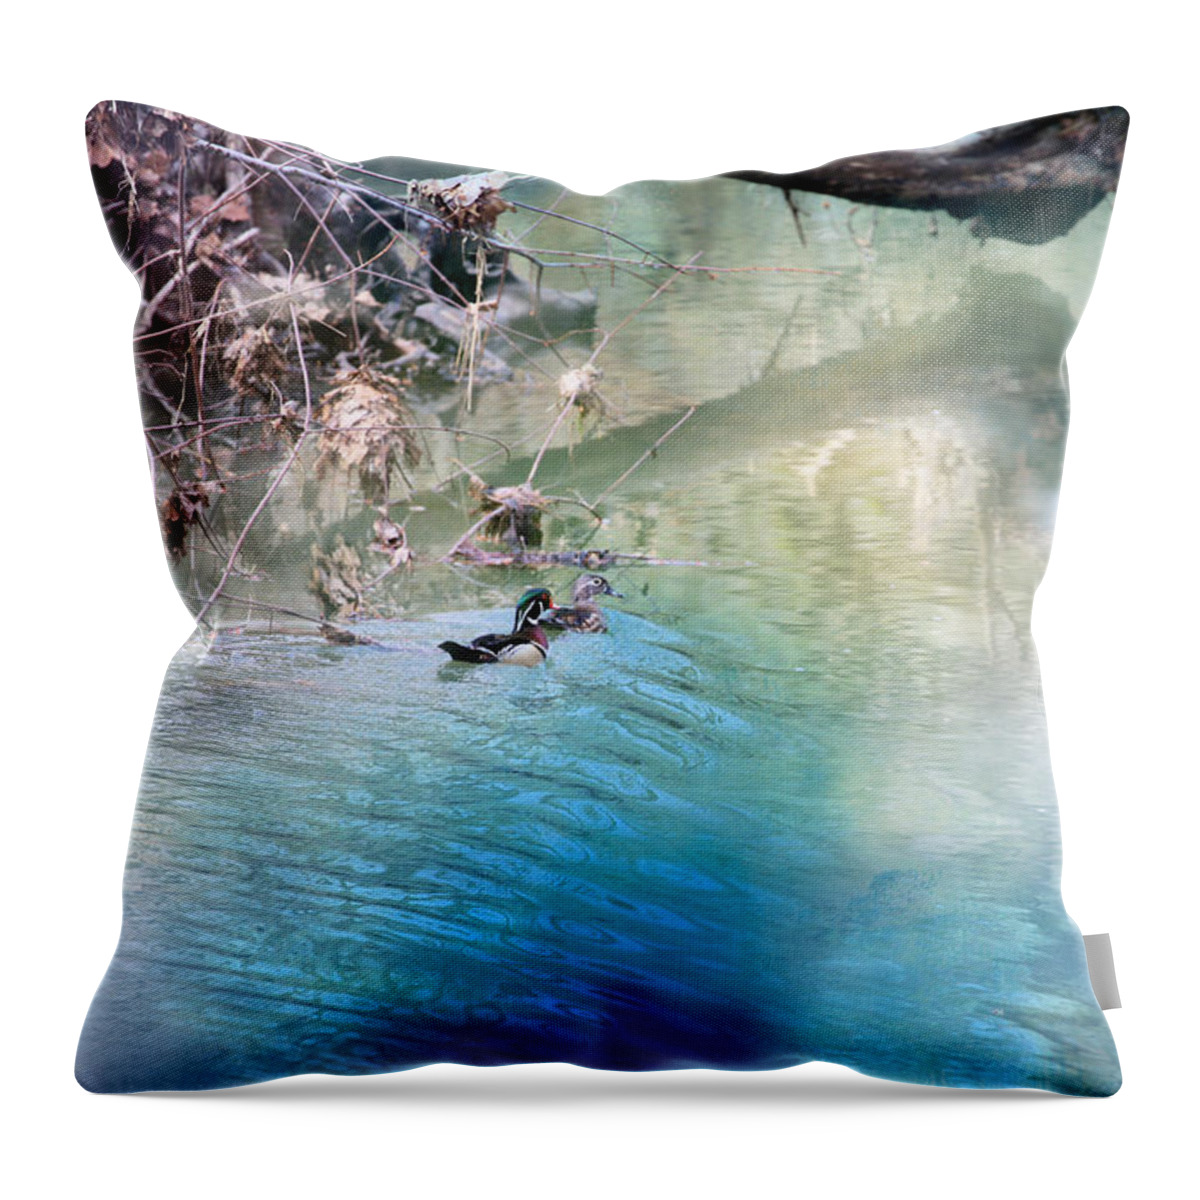 Ducks Throw Pillow featuring the photograph The Rainbow Reflection by Theresa Campbell